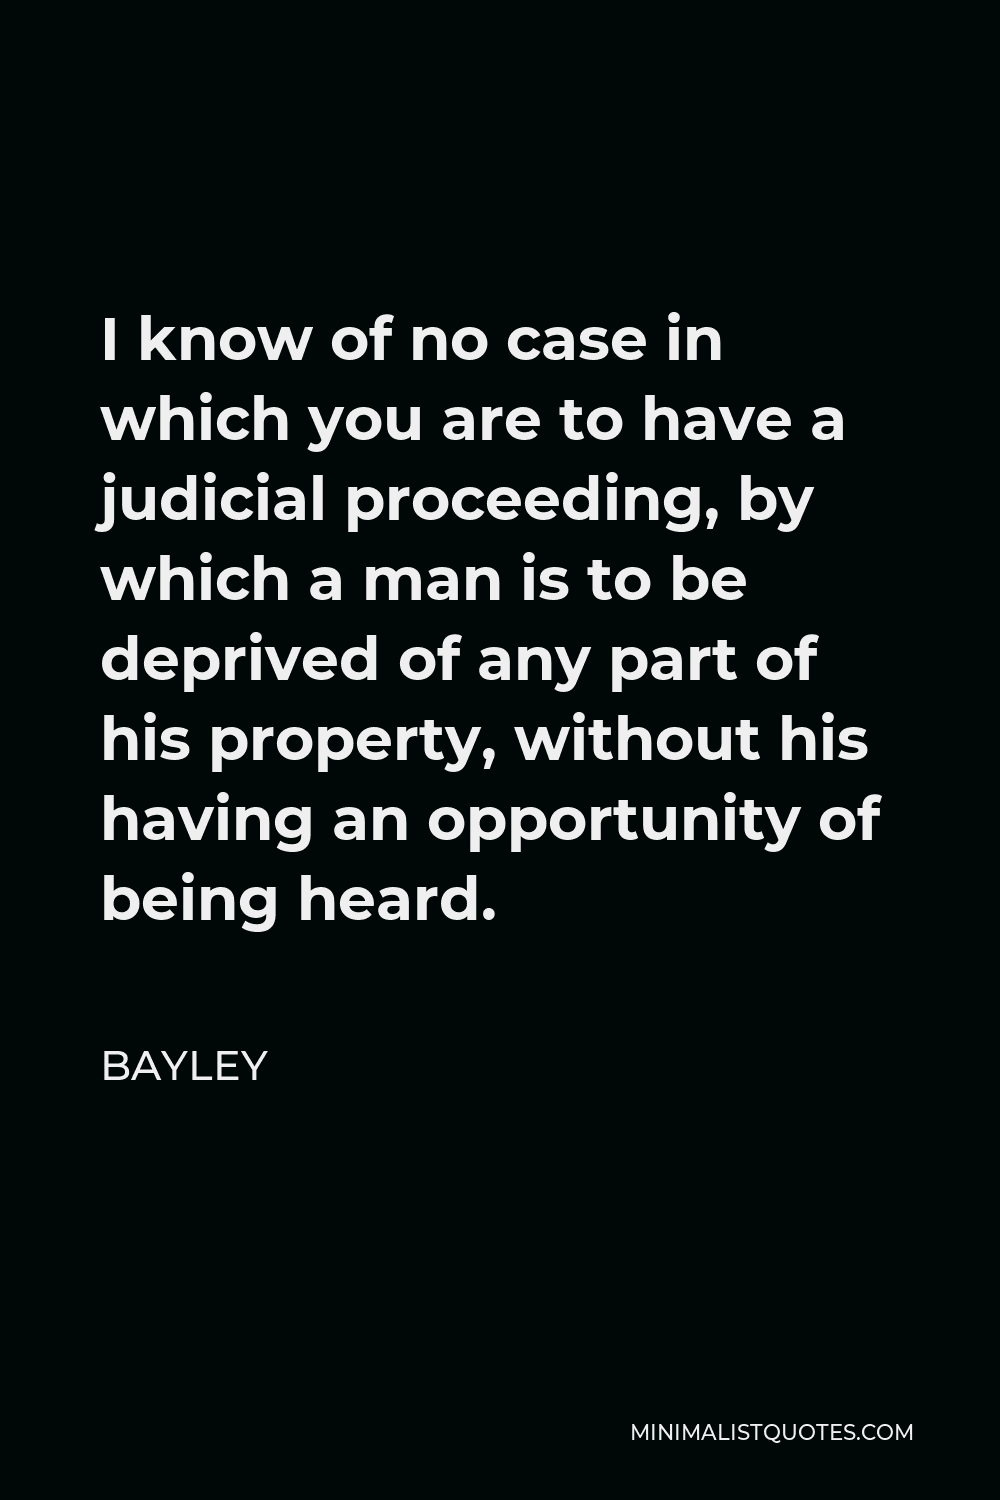 Bayley Quote - I know of no case in which you are to have a judicial proceeding, by which a man is to be deprived of any part of his property, without his having an opportunity of being heard.